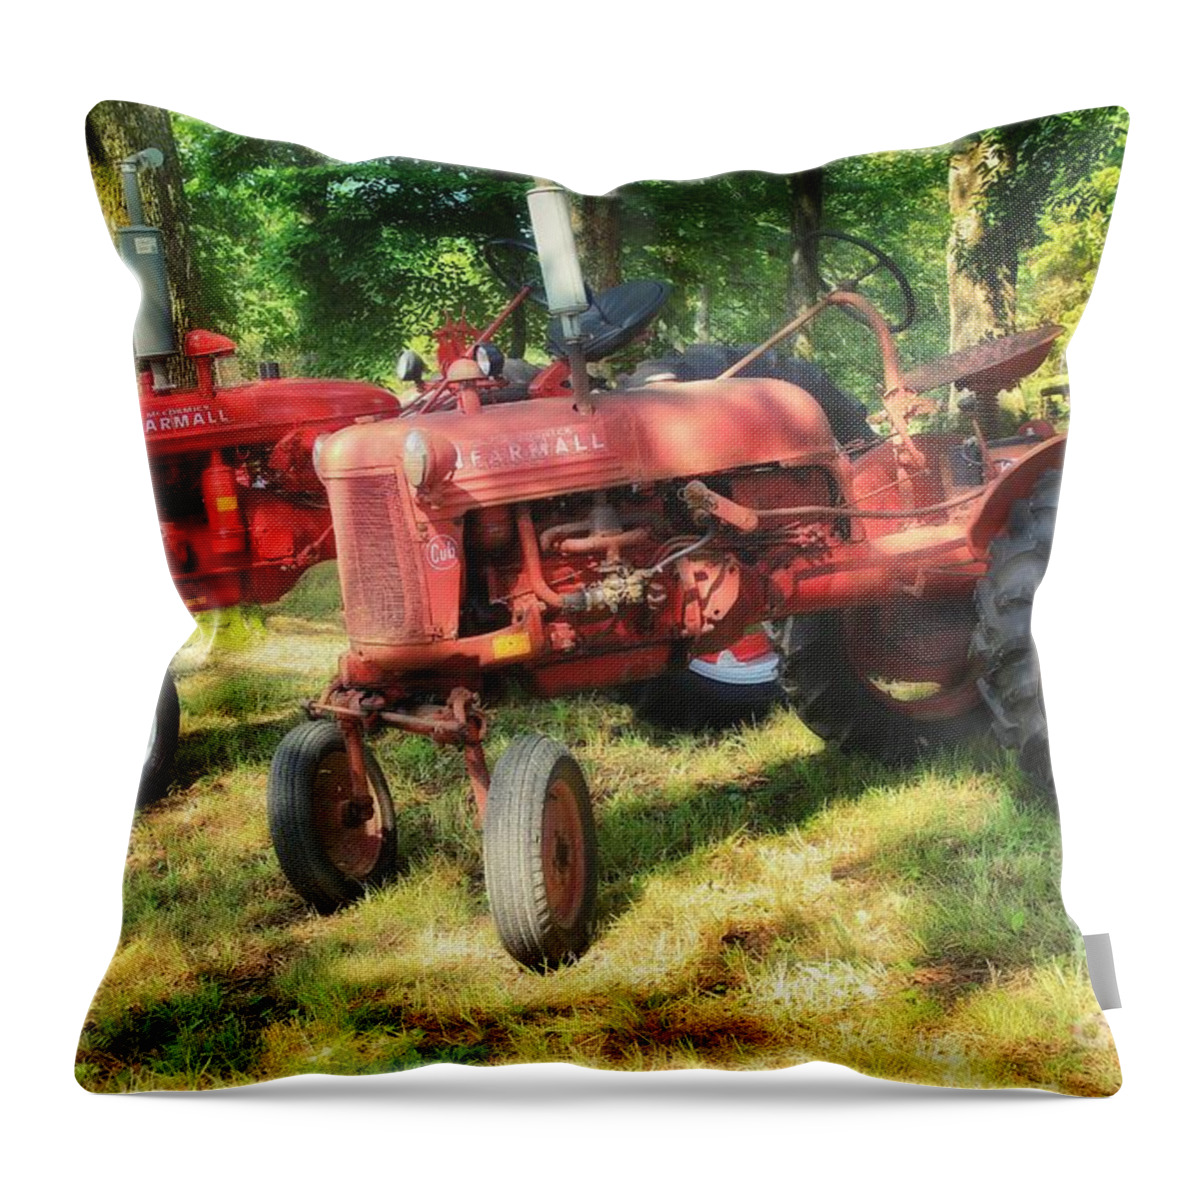 Farmall Throw Pillow featuring the photograph Pair of Farmalls by Mike Eingle